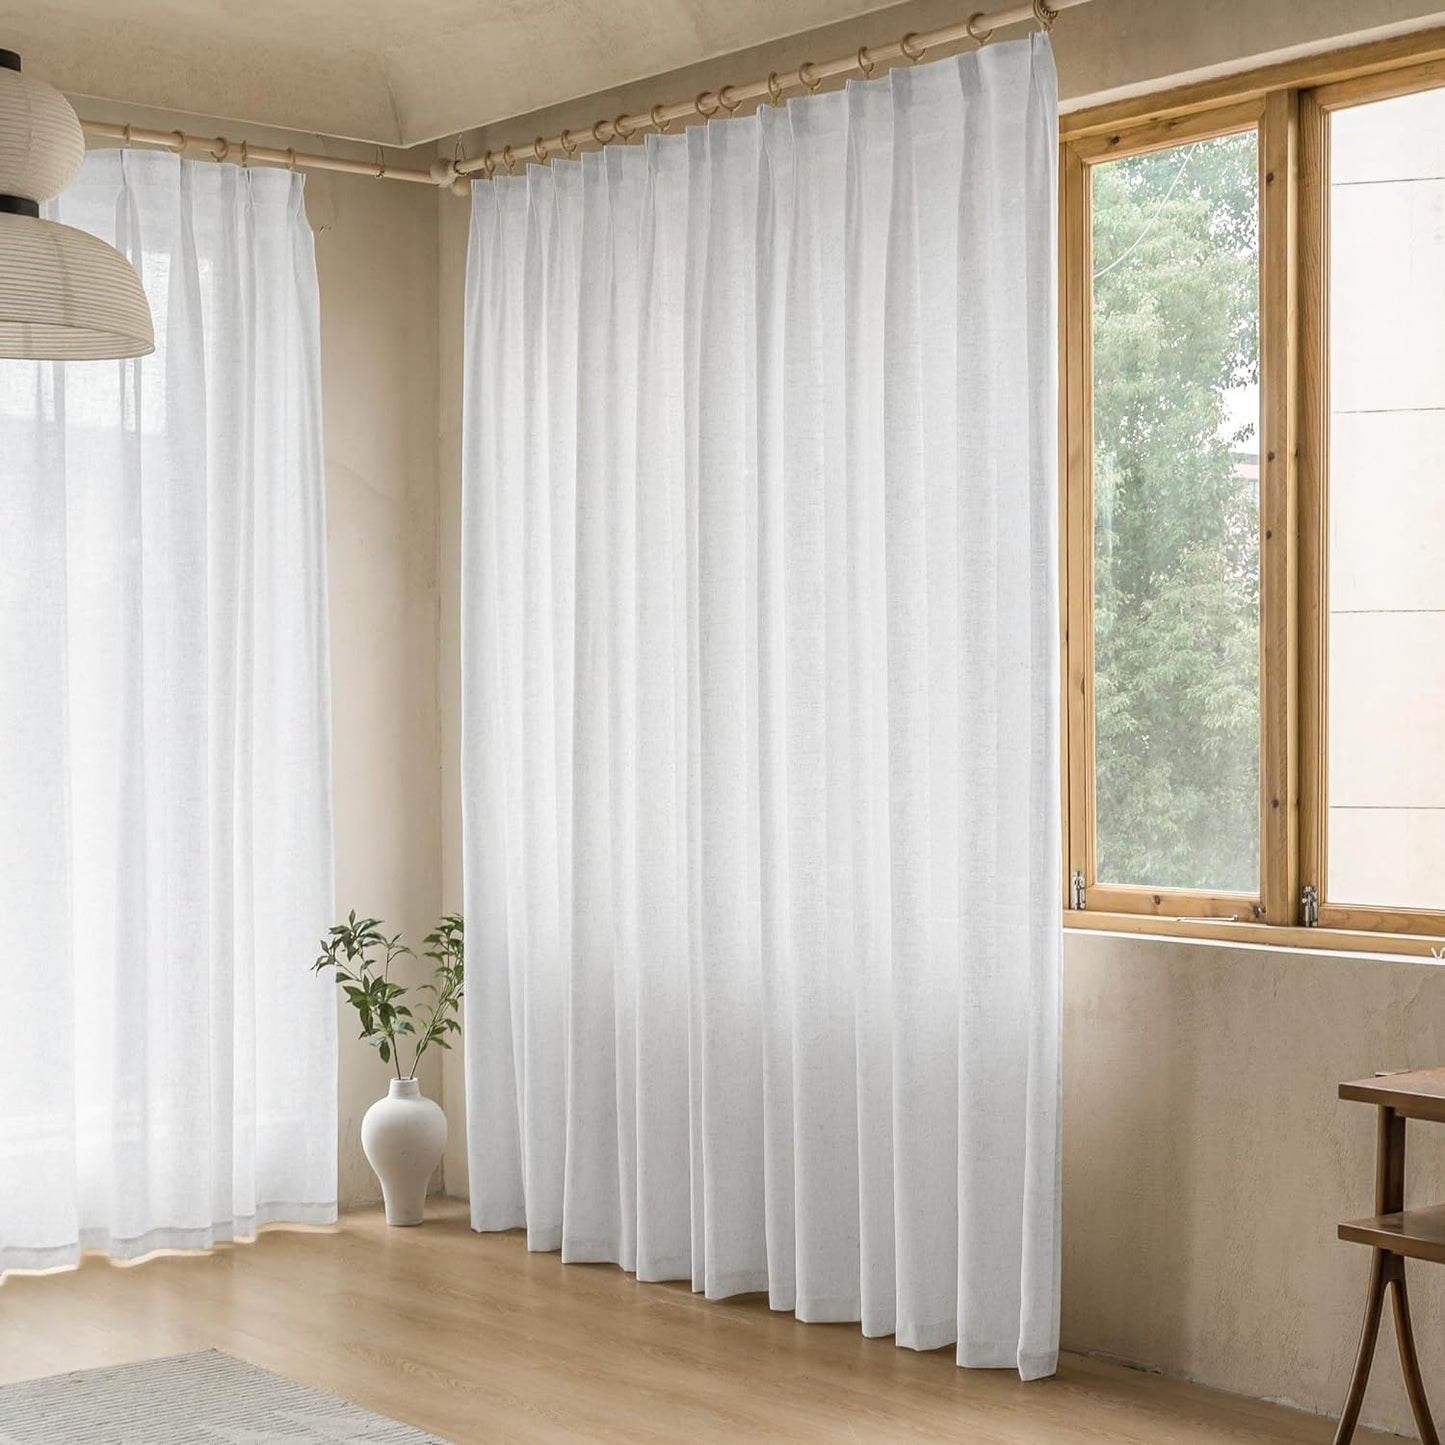 MAIHER Extra Wide Faux Linen Curtains Pinch Pleated, 108 Inches Long Light Filtering Semi Sheer Curtains Patio Door for Living Room, Pinch Pleat Drapes with Hooks (1 Panel, 84" W X 108" L)  MAIHER Beige White 54X108 